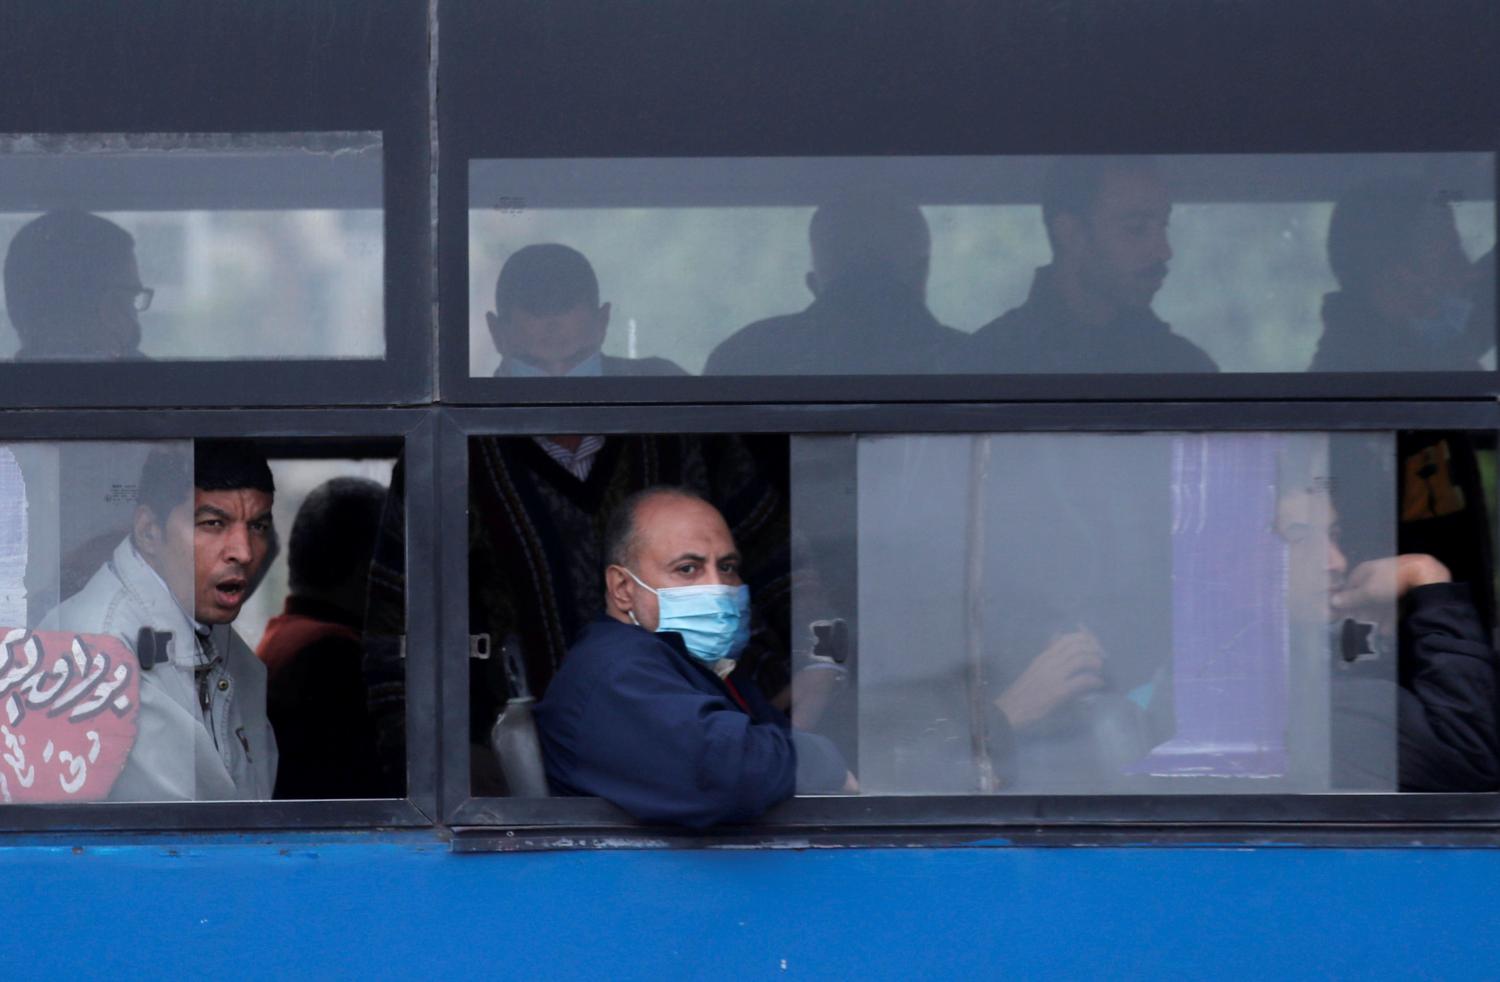 Egyptians, some of them wearing protective masks,  look from the bus windows amid the coronavirus disease (COVID-19) pandemic in Cairo, Egypt December 17, 2020. REUTERS/Amr Abdallah Dalsh